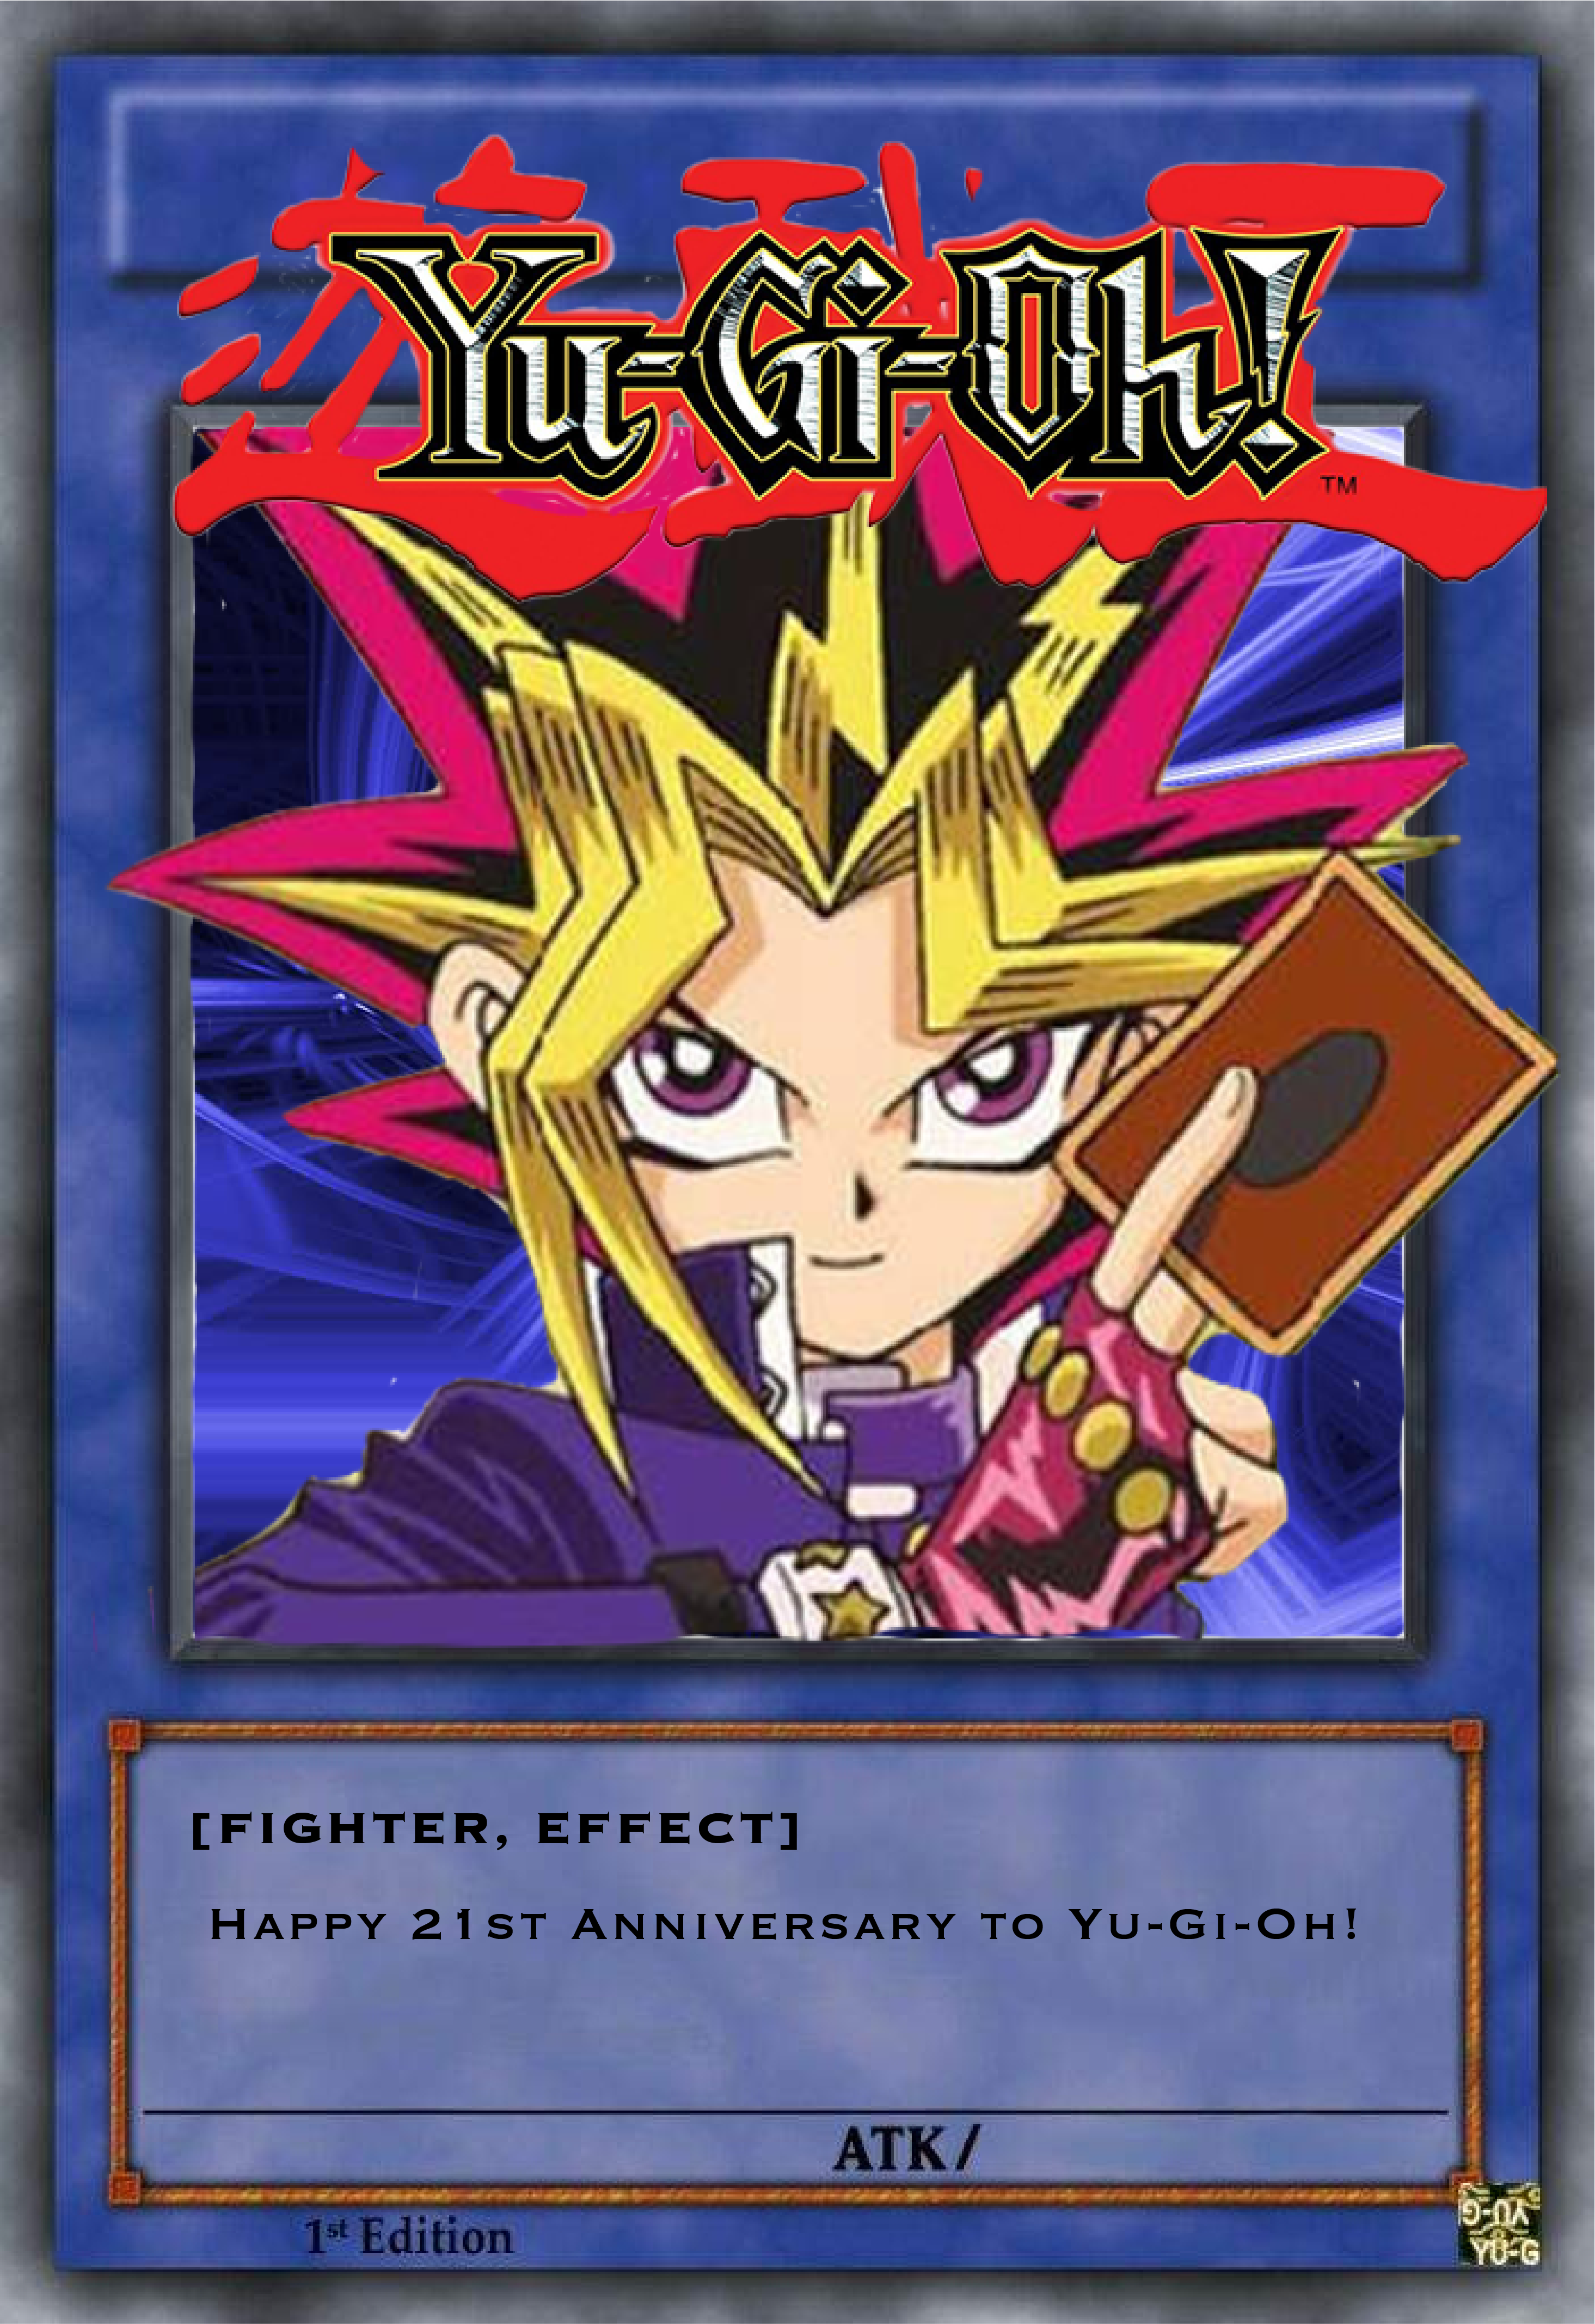 Yu-Gi-Oh! Turns 21 And Two Veteran Duelists Look Back On How We Got Here.